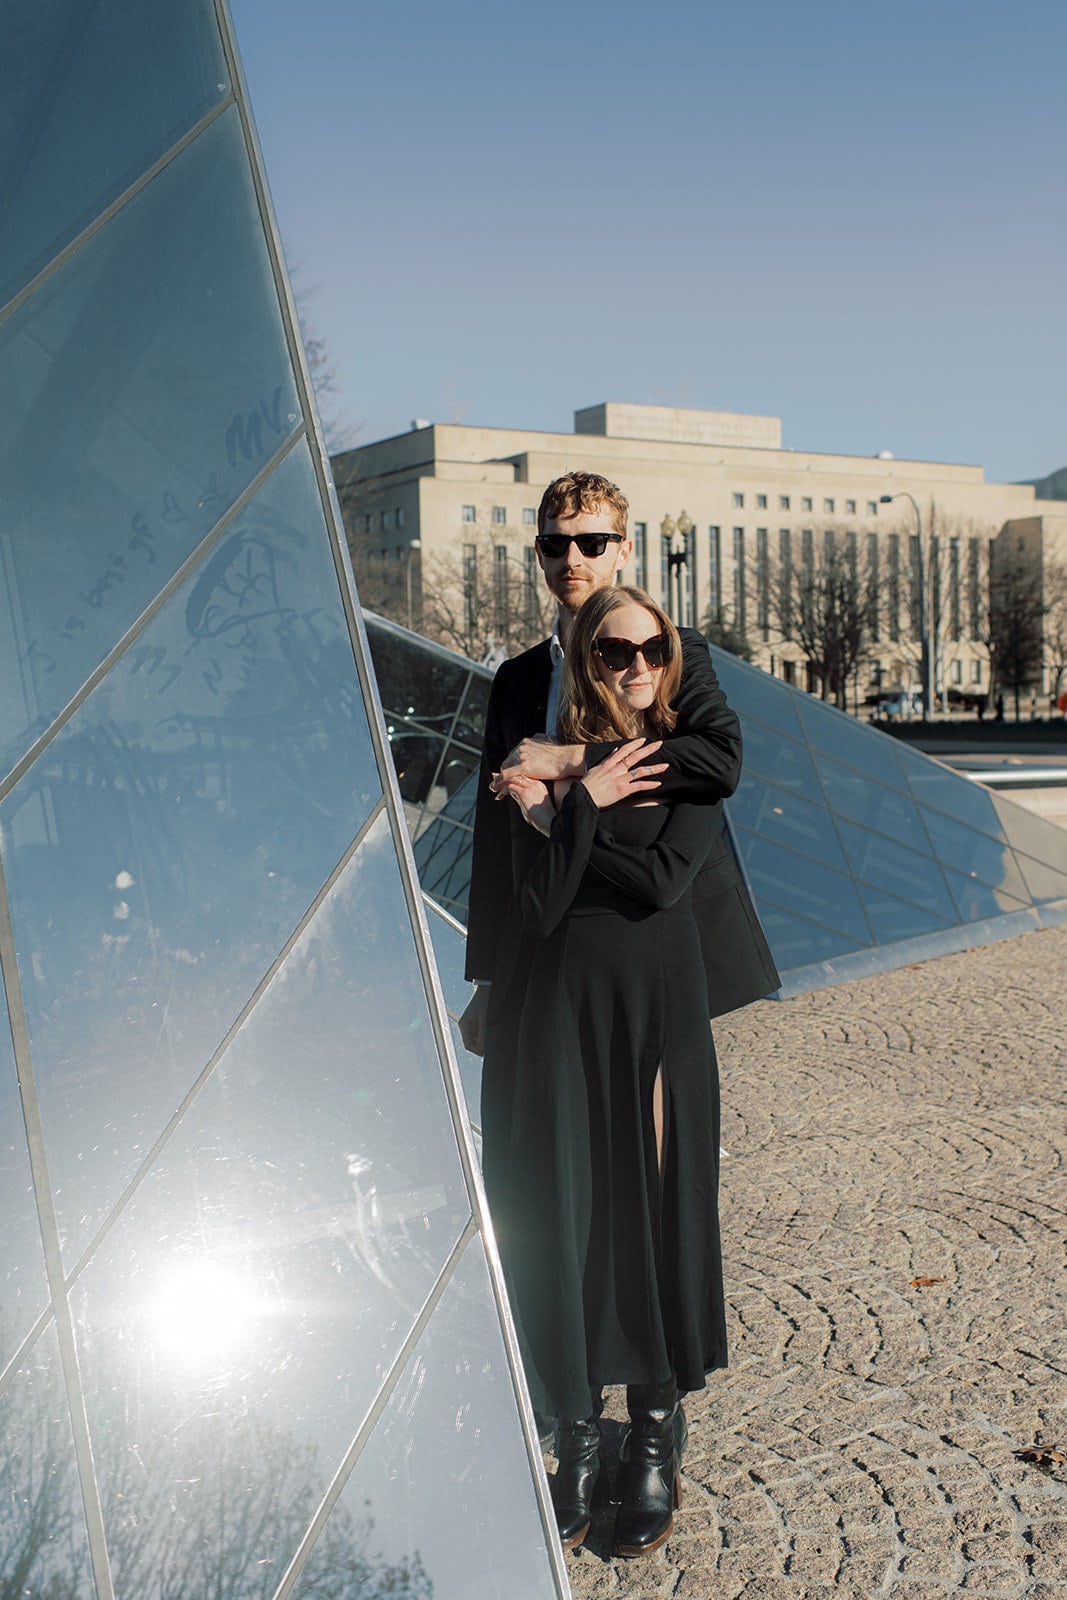 modern Washington DC engagement photographer at the glass pyramids national portrait gallery engagement session L Hewitt Photography

